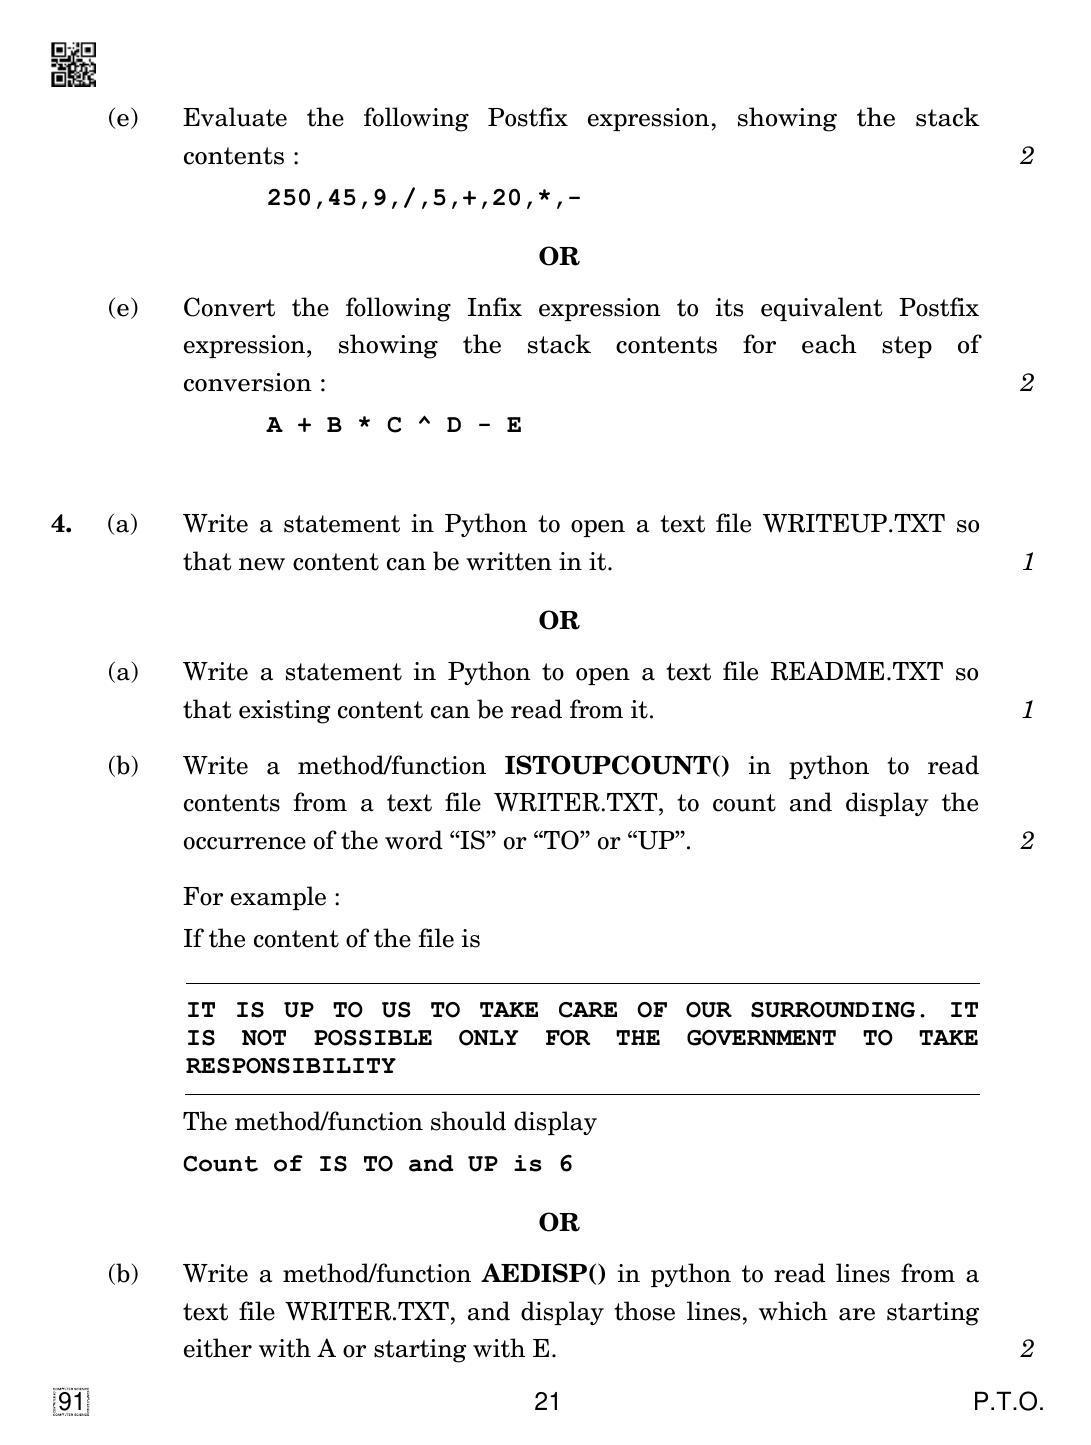 CBSE Class 12 91 Computer Science 2019 Question Paper - Page 21